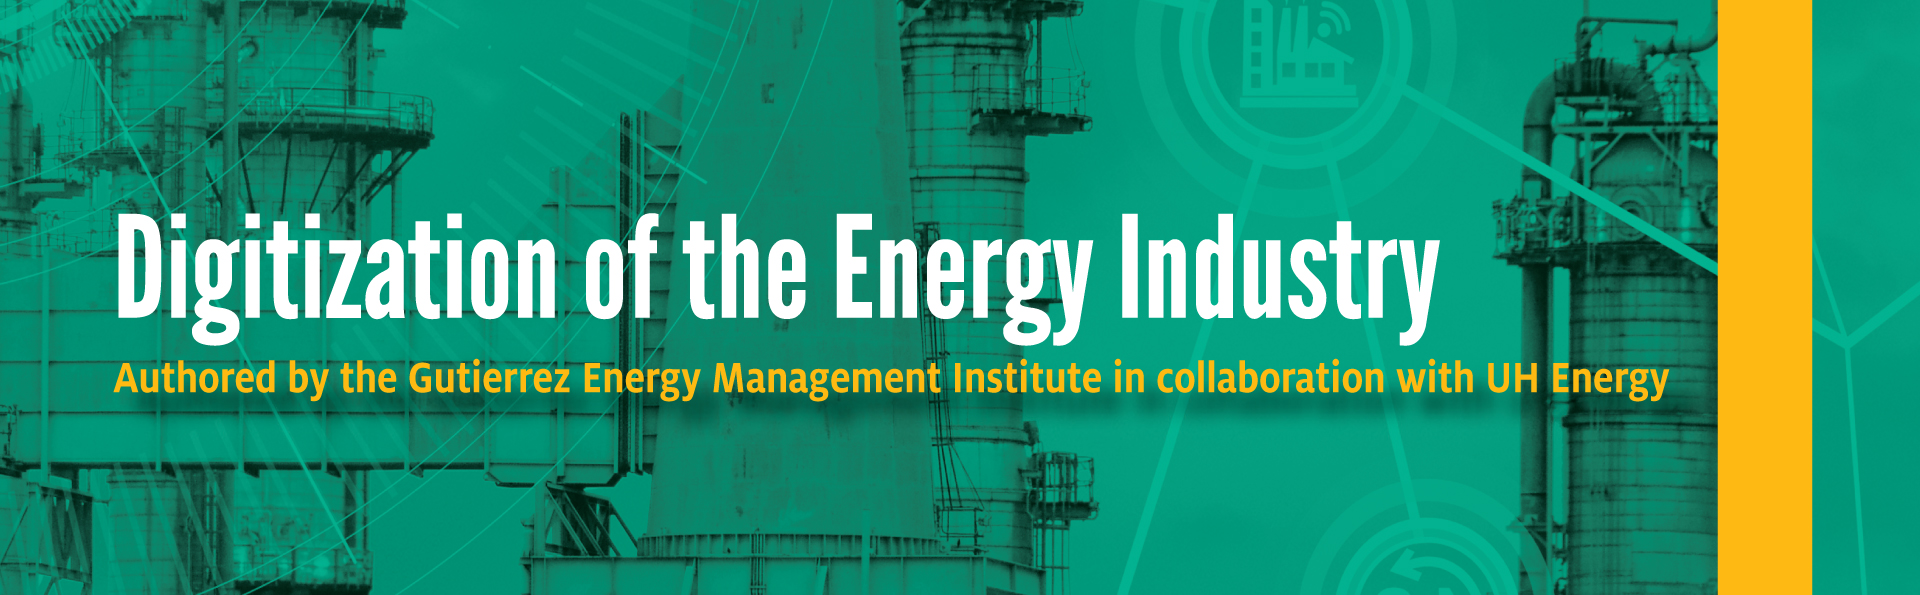 Digitization of the Energy Industry